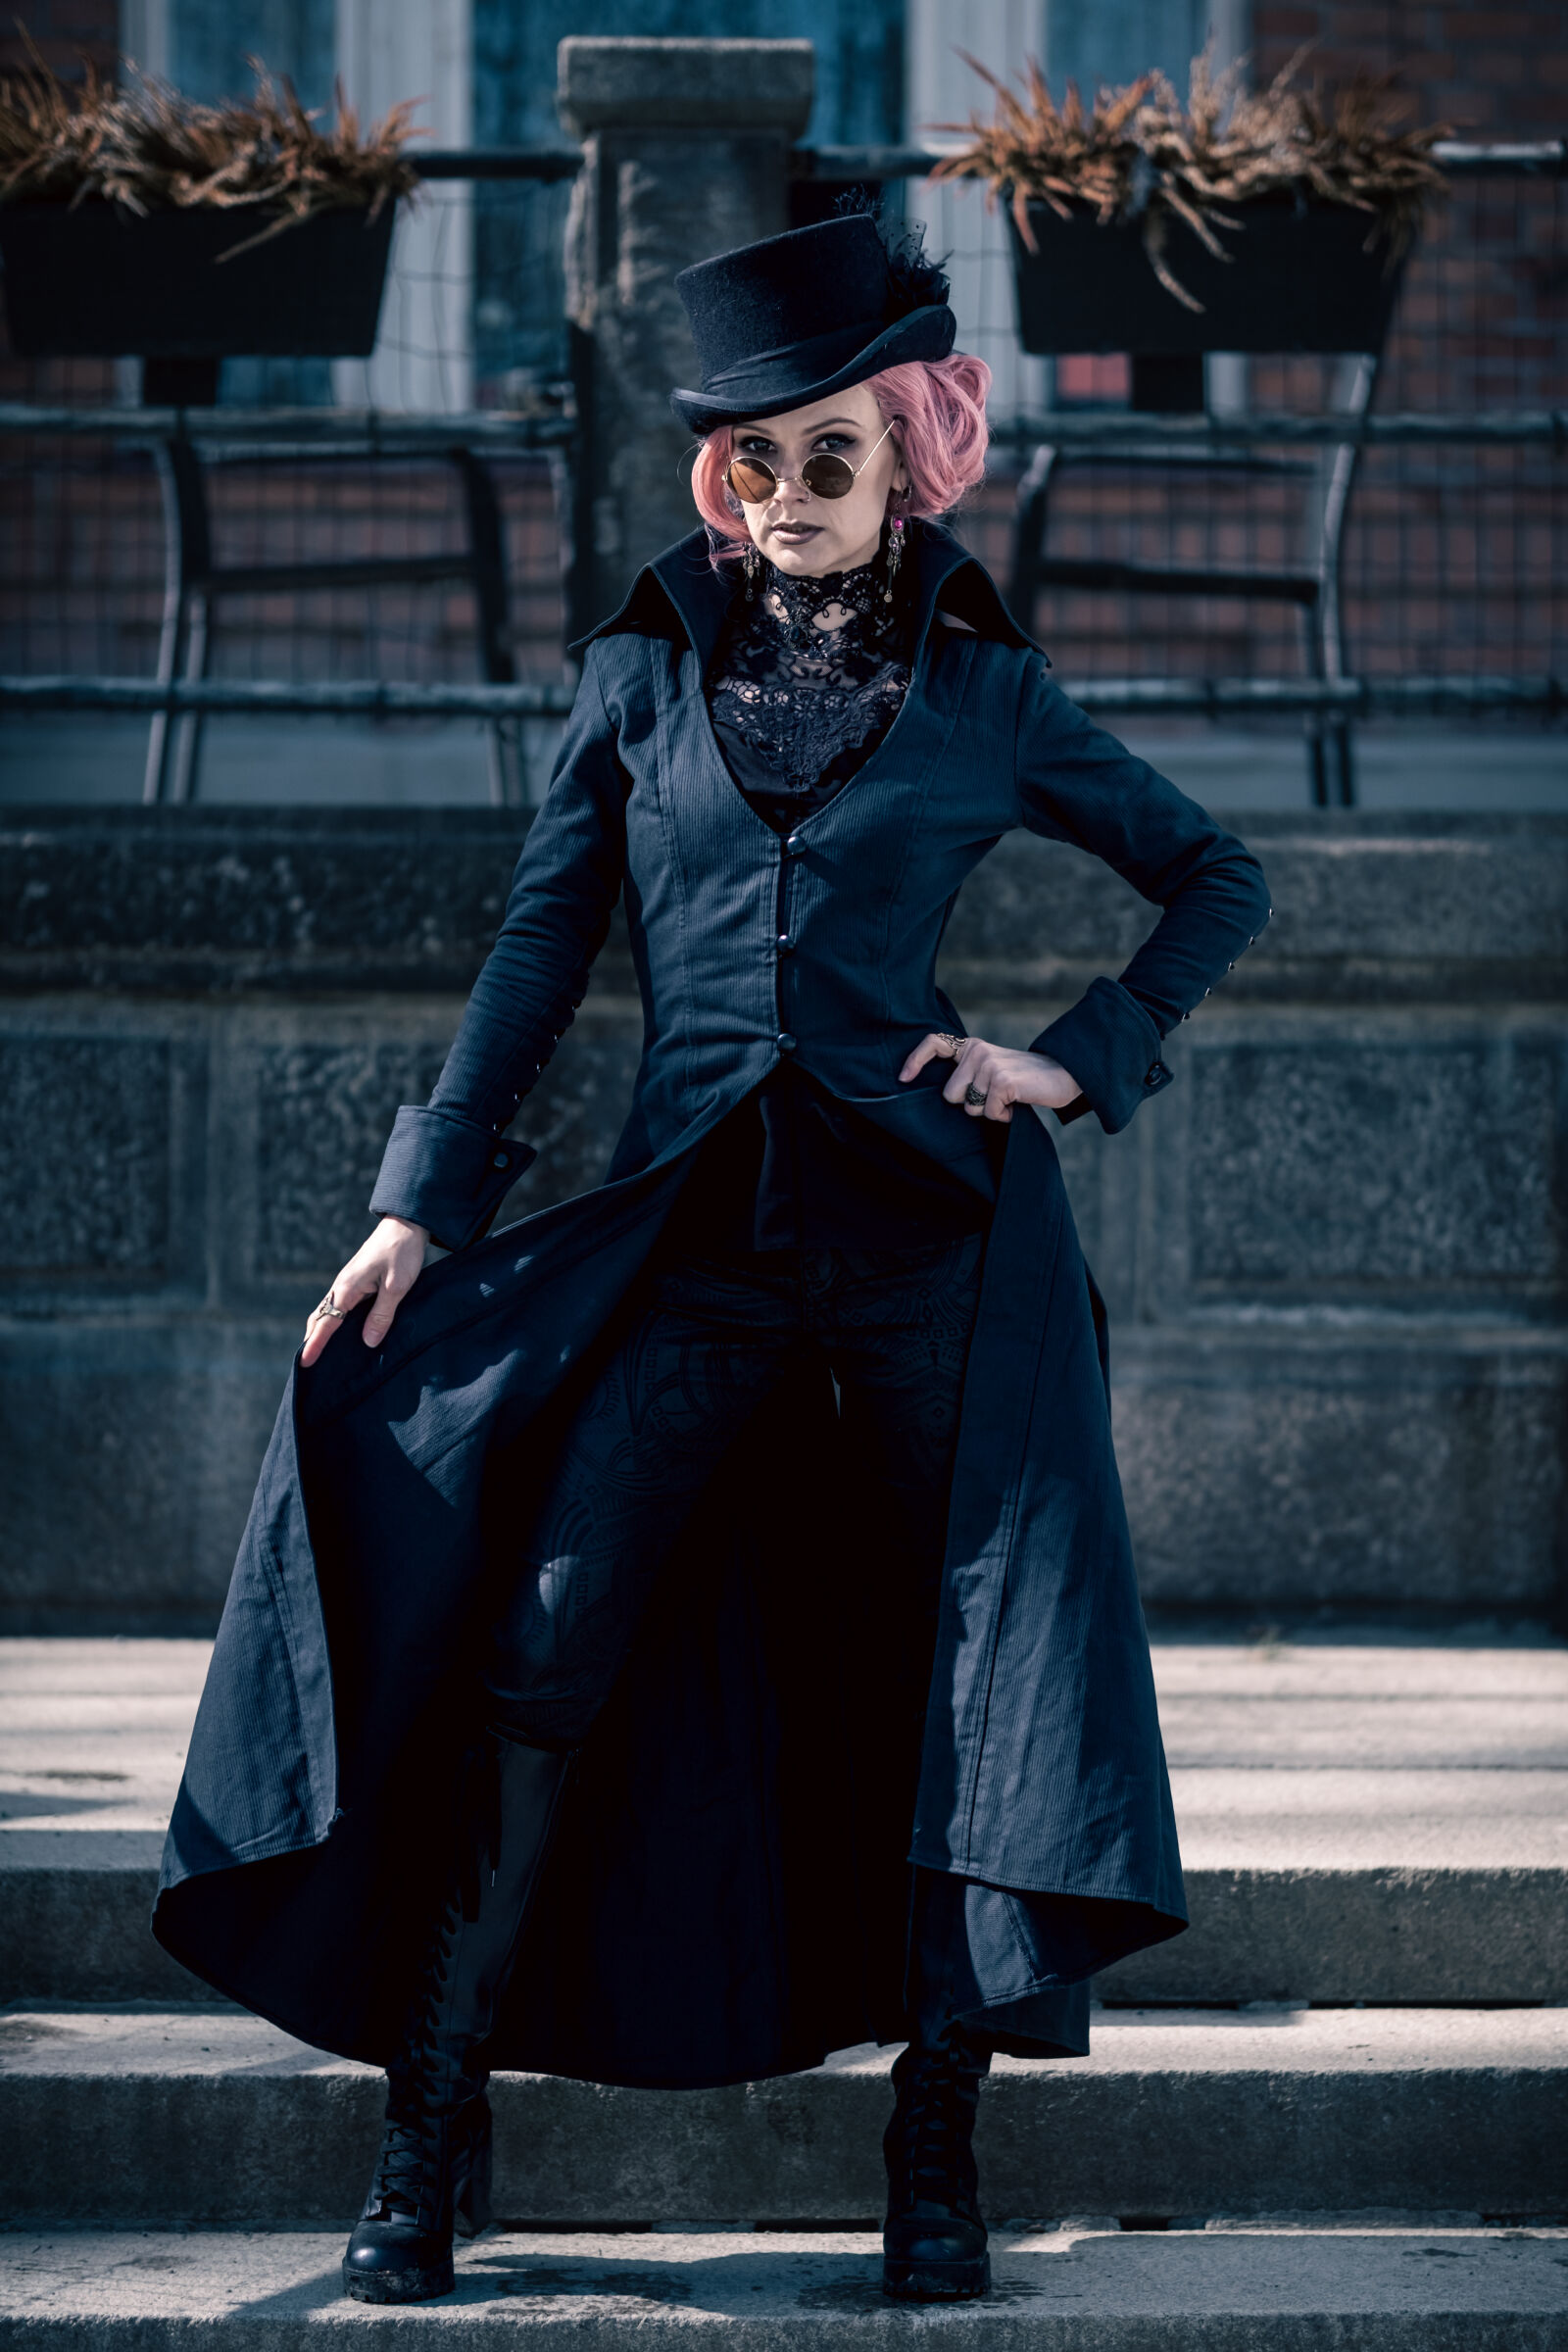 Fujifilm X-T4 sample photo. The tophat lady photography